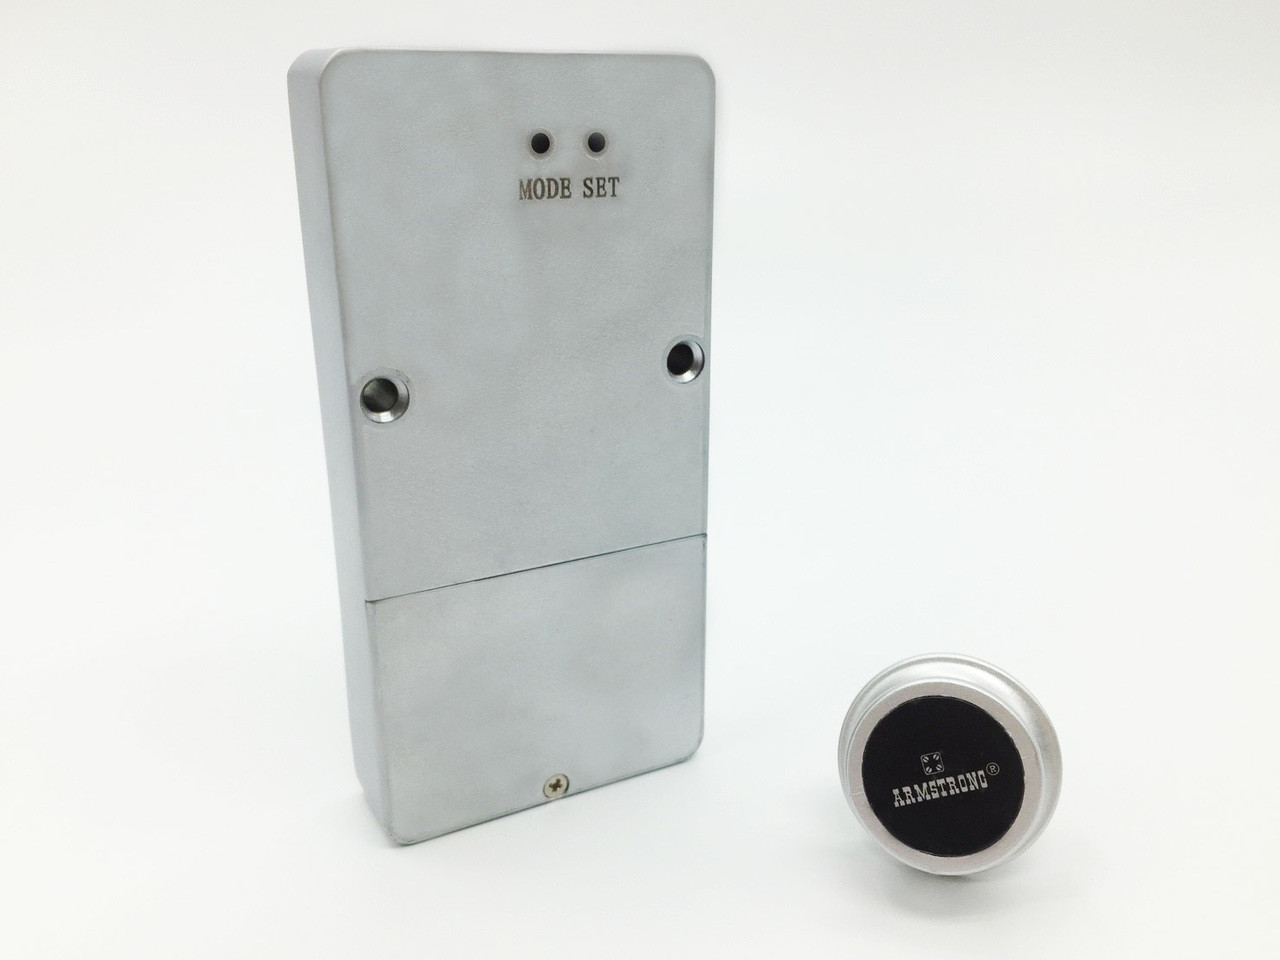  Reinforced RFID cabinet lock with knob, cabinet lock, Mifare, 13.56 Mhz